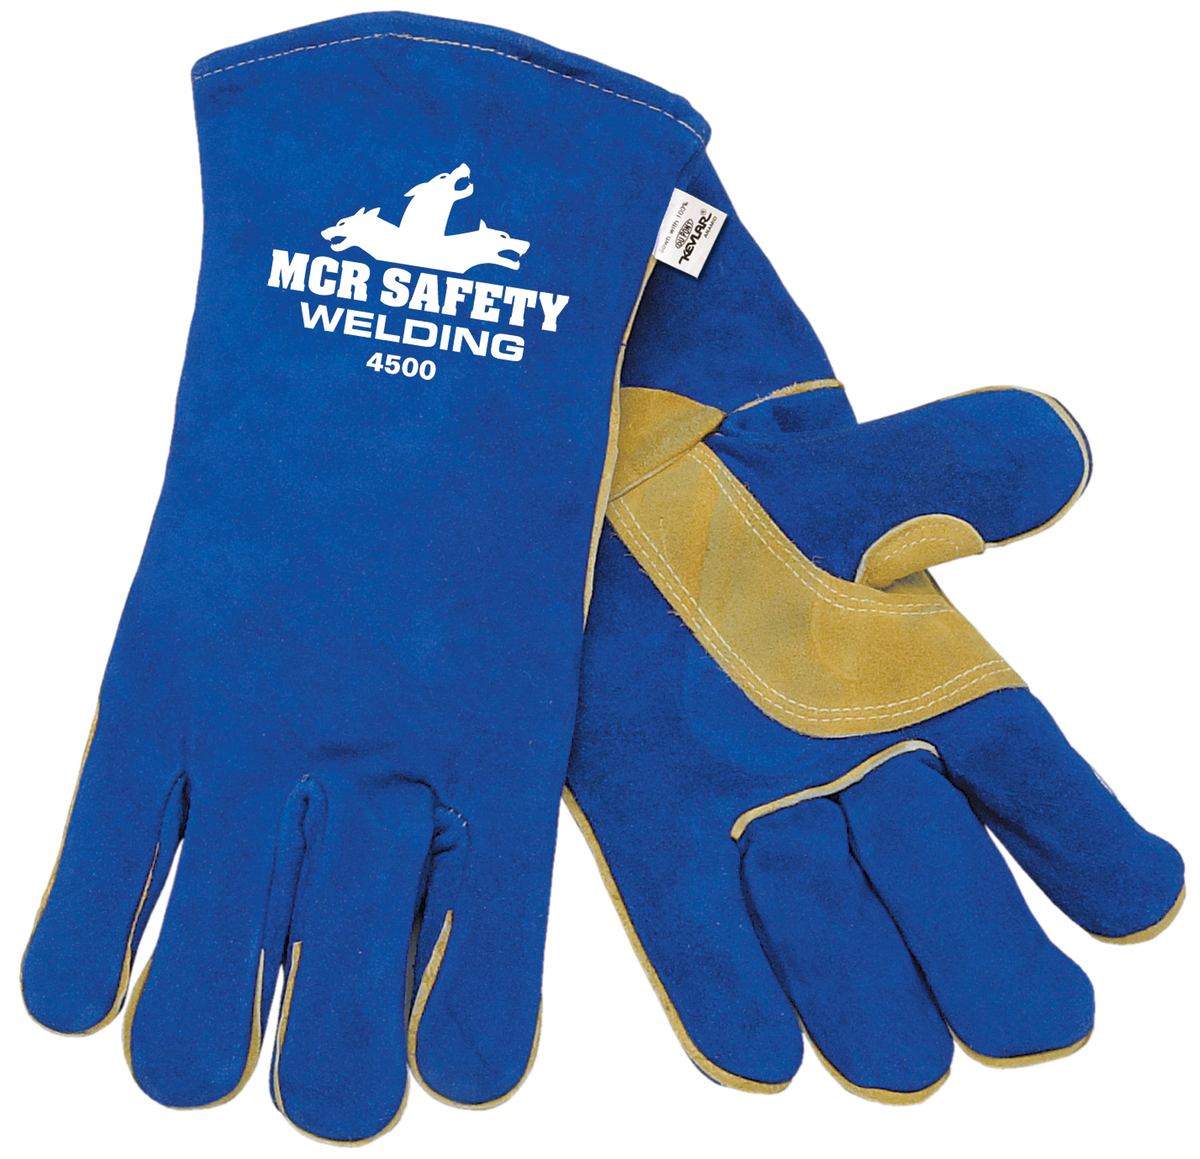 Foam Lined Select Shoulder Cow Skin Leather Welding Work Gloves with Reinforced Wing Thumb - Welding